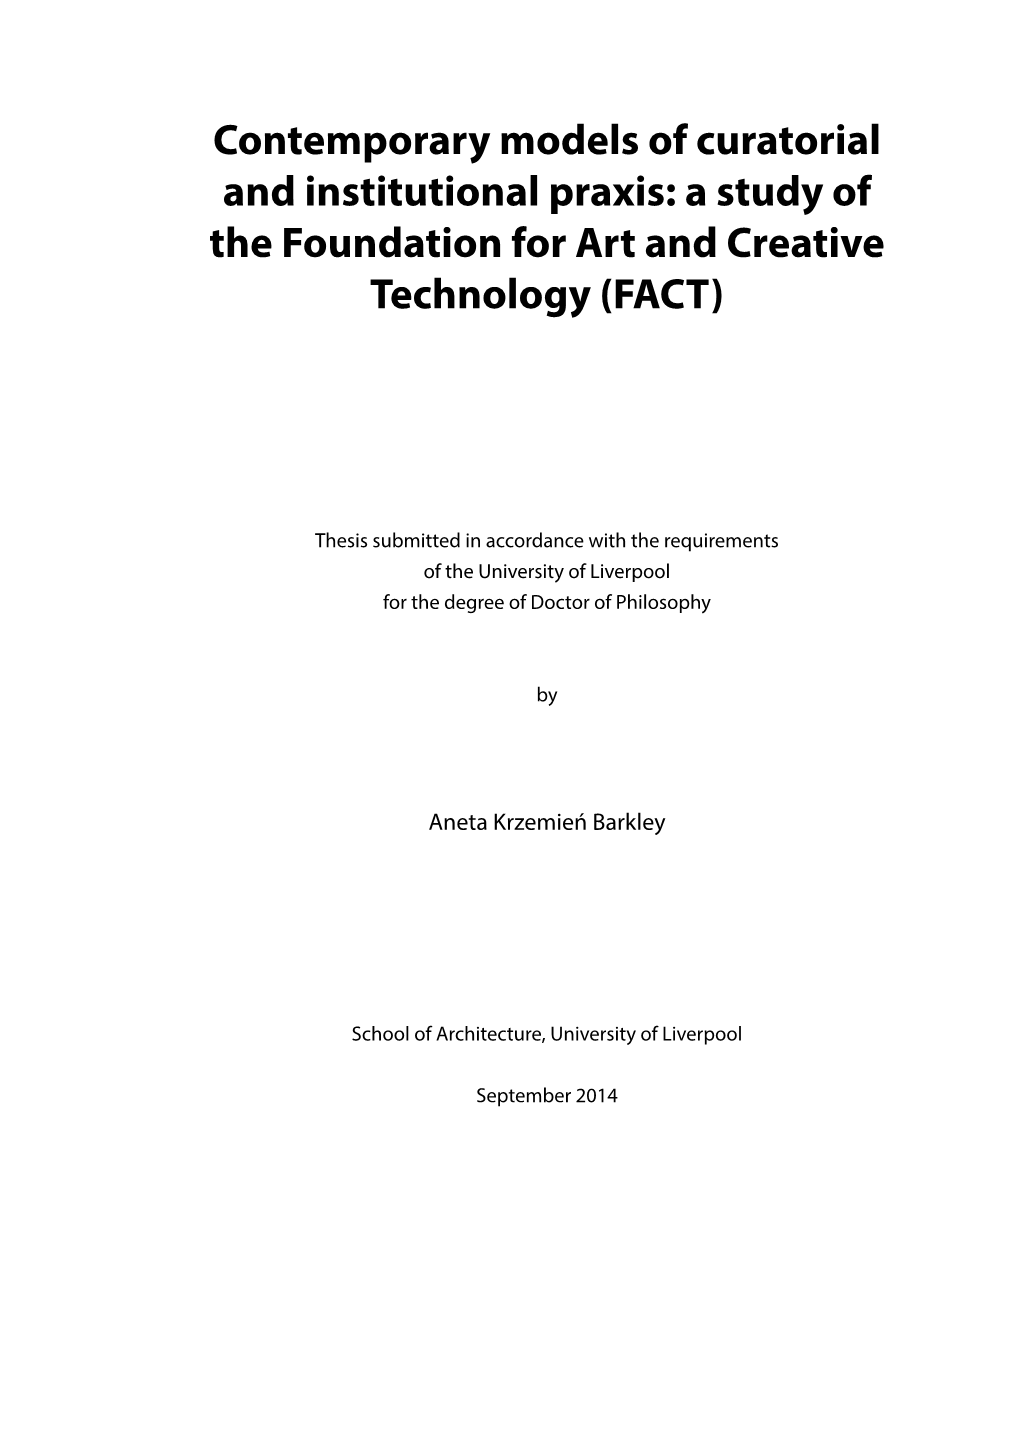 Contemporary Models of Curatorial and Institutional Praxis: a Study of the Foundation for Art and Creative Technology (FACT)